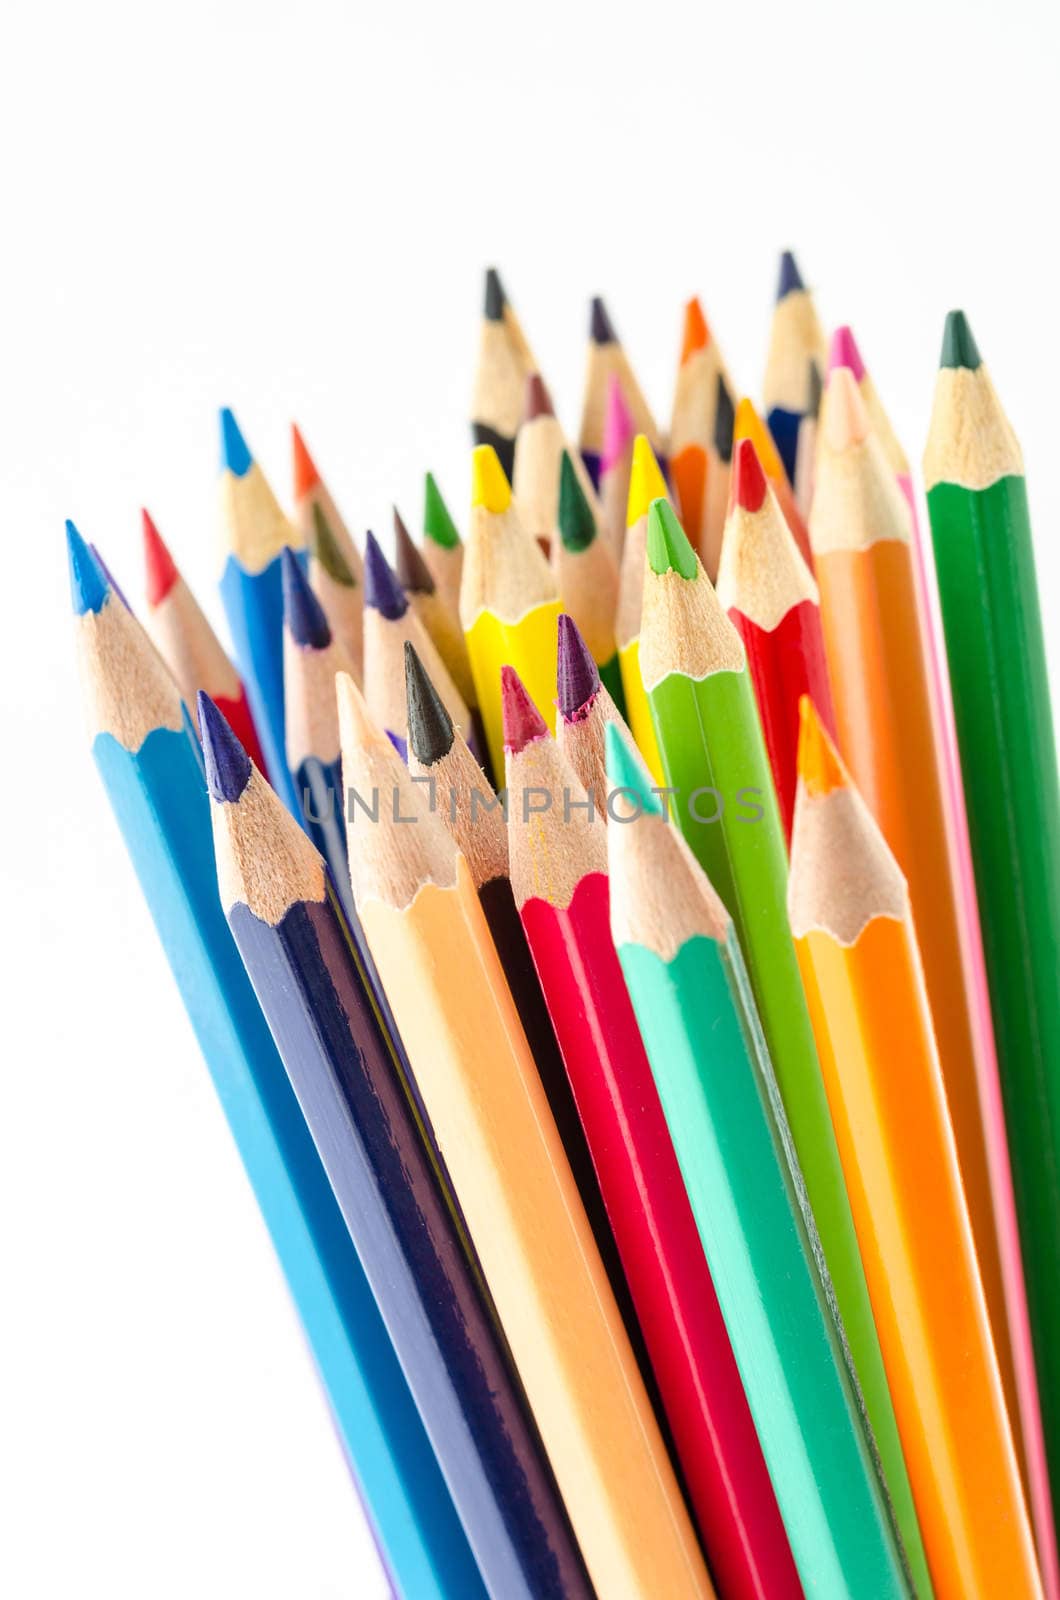 Colouring crayon pencils on white background